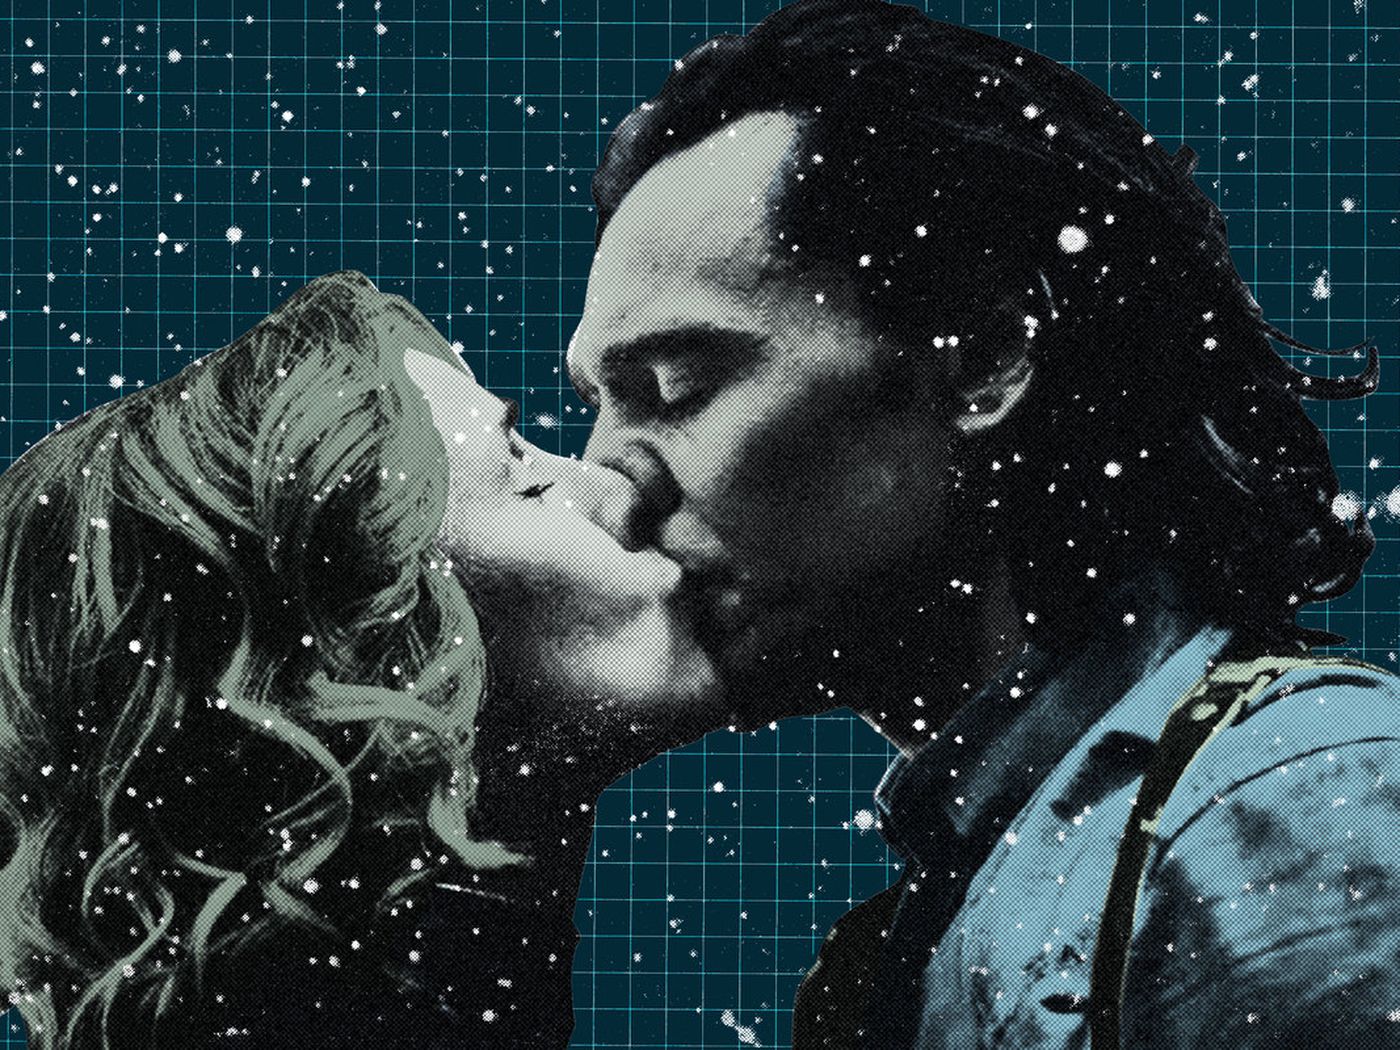 Loki' Shows What the Marvel Cinematic Universe Is Missing: Romance